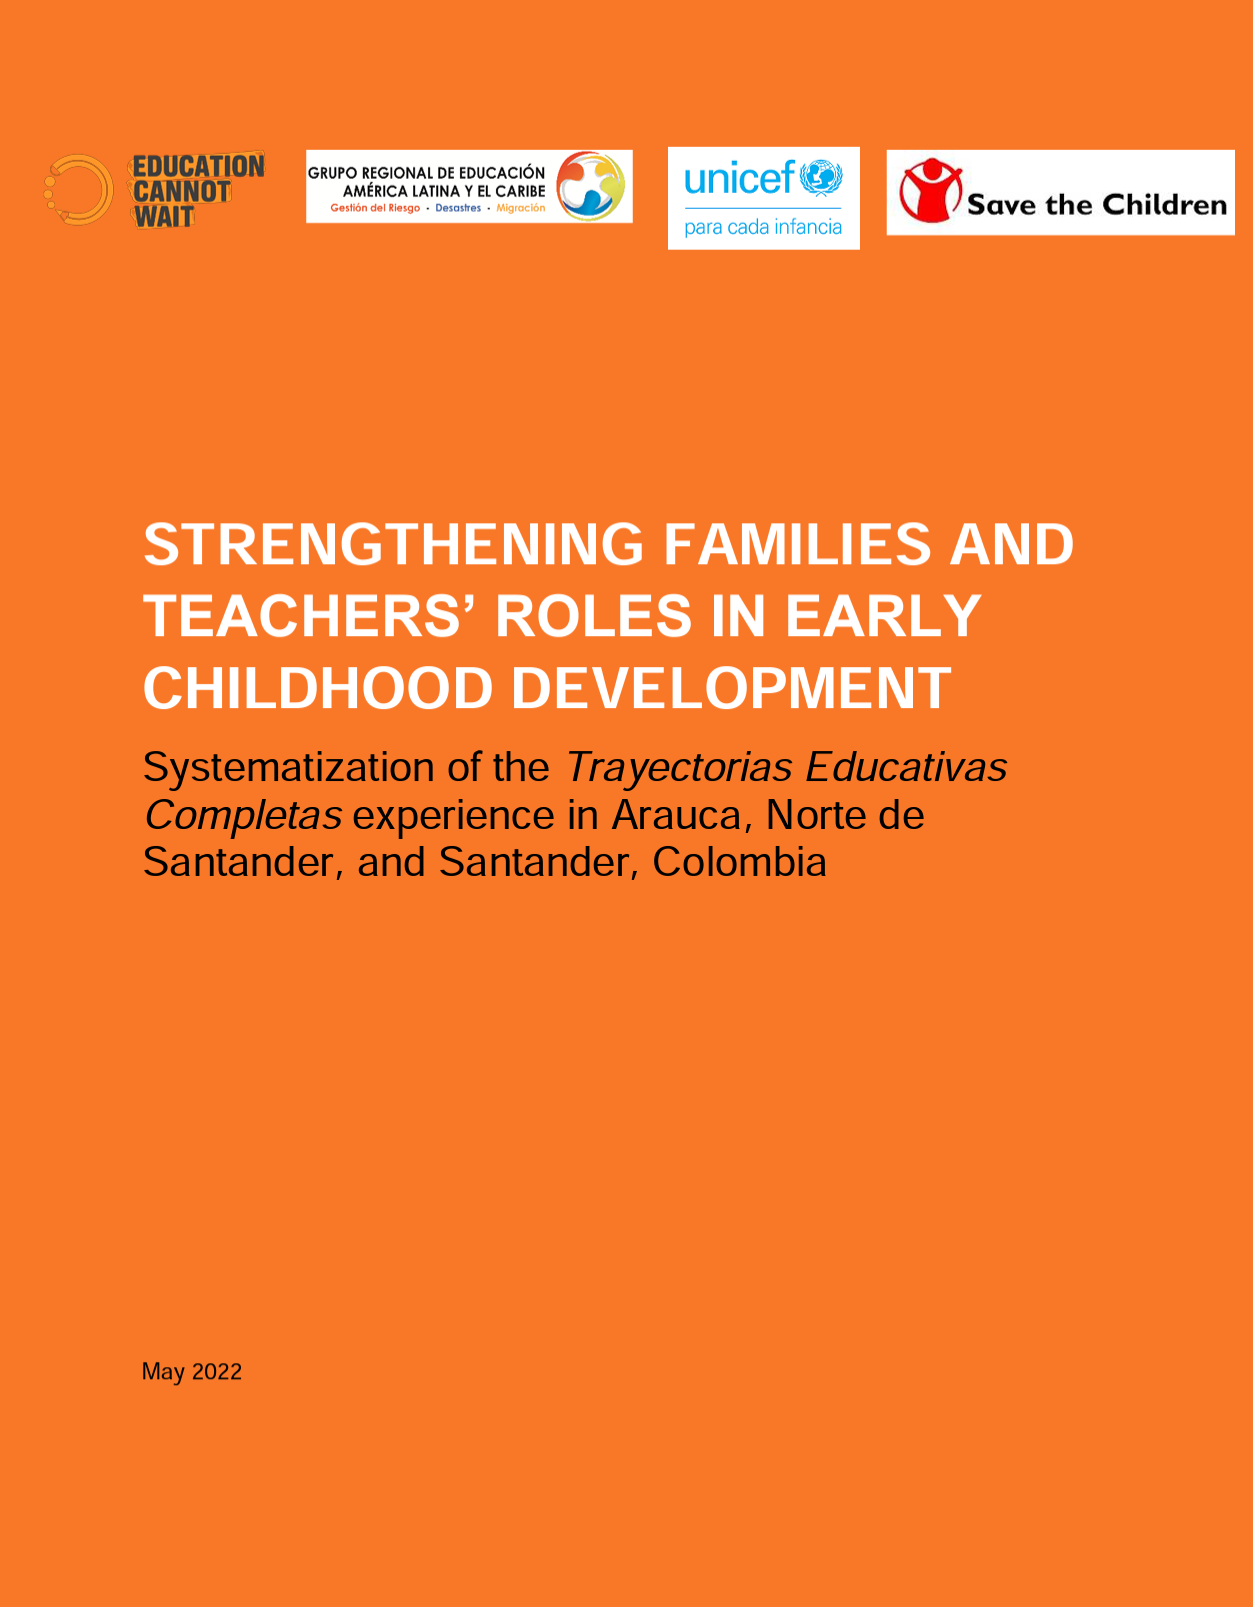 Strengthening Families and Teachers’ Roles in Early Childhood Development: Systematization of the Trayectorias Educativas Completas Experience in Arauca, Norte de Santander, and Santander, Colombia